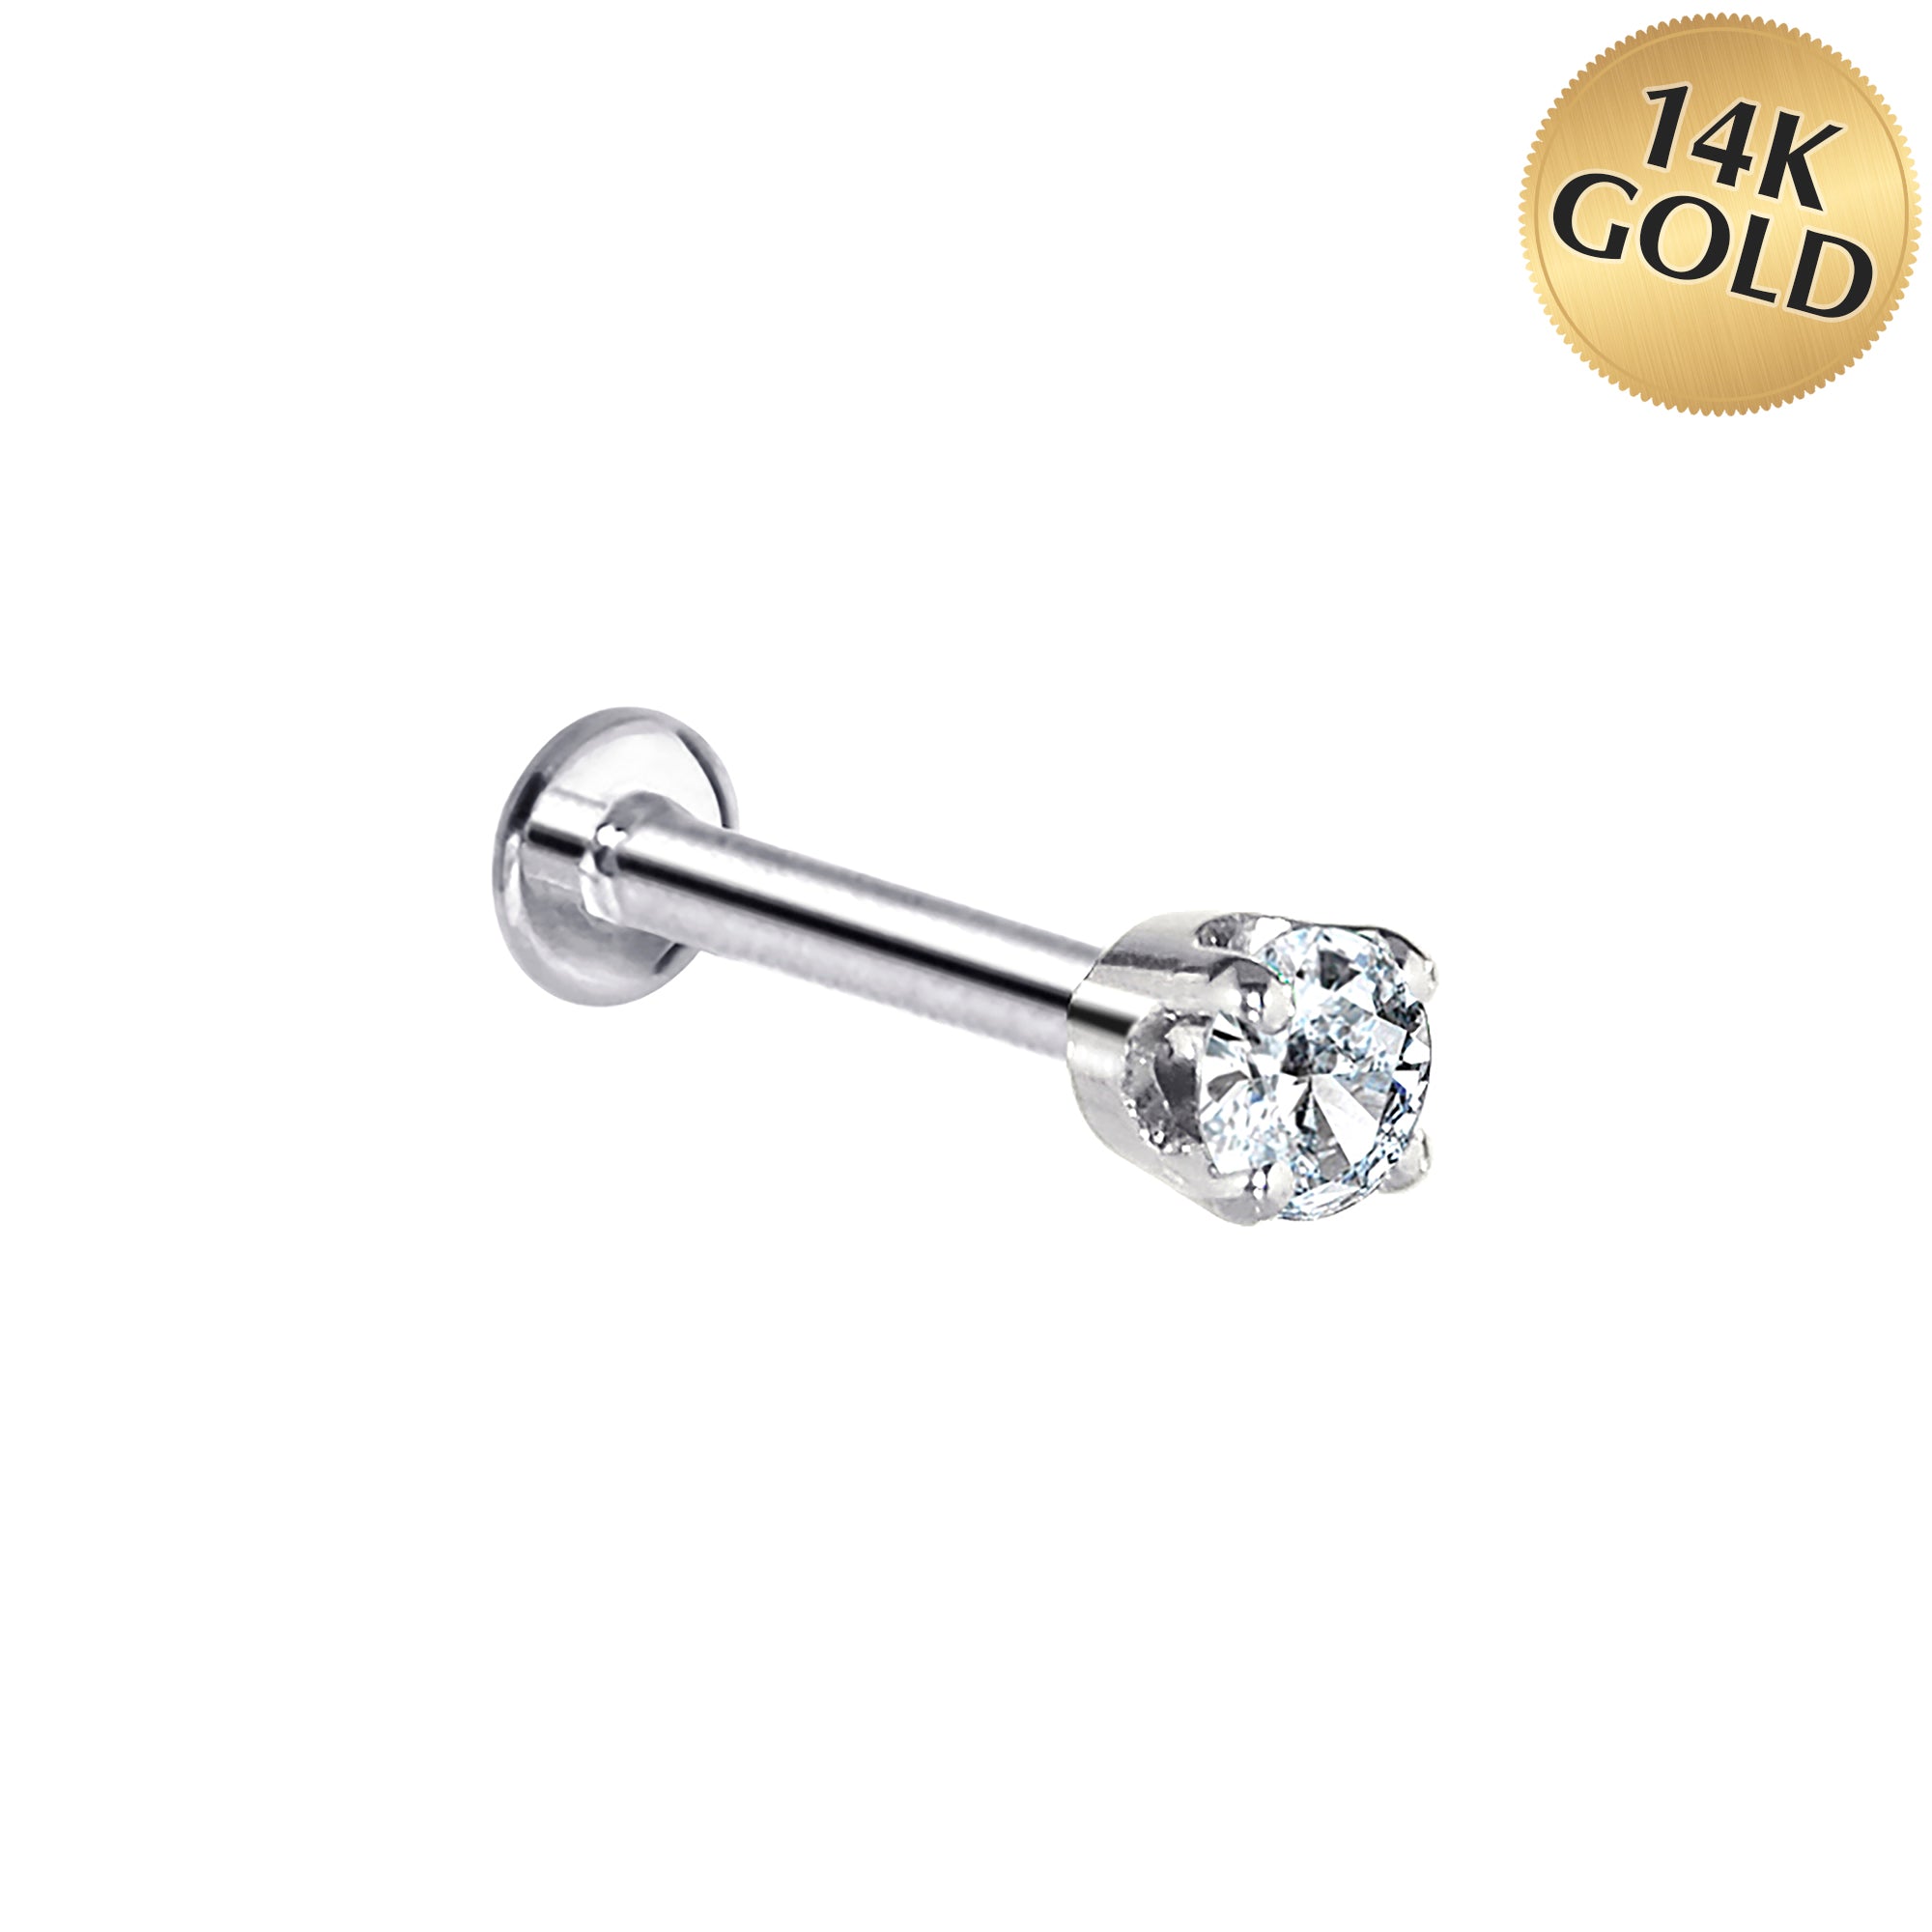 16 Gauge Solid 14KT White Gold 3mm Cubic Zirconia Tragus Earring Stud